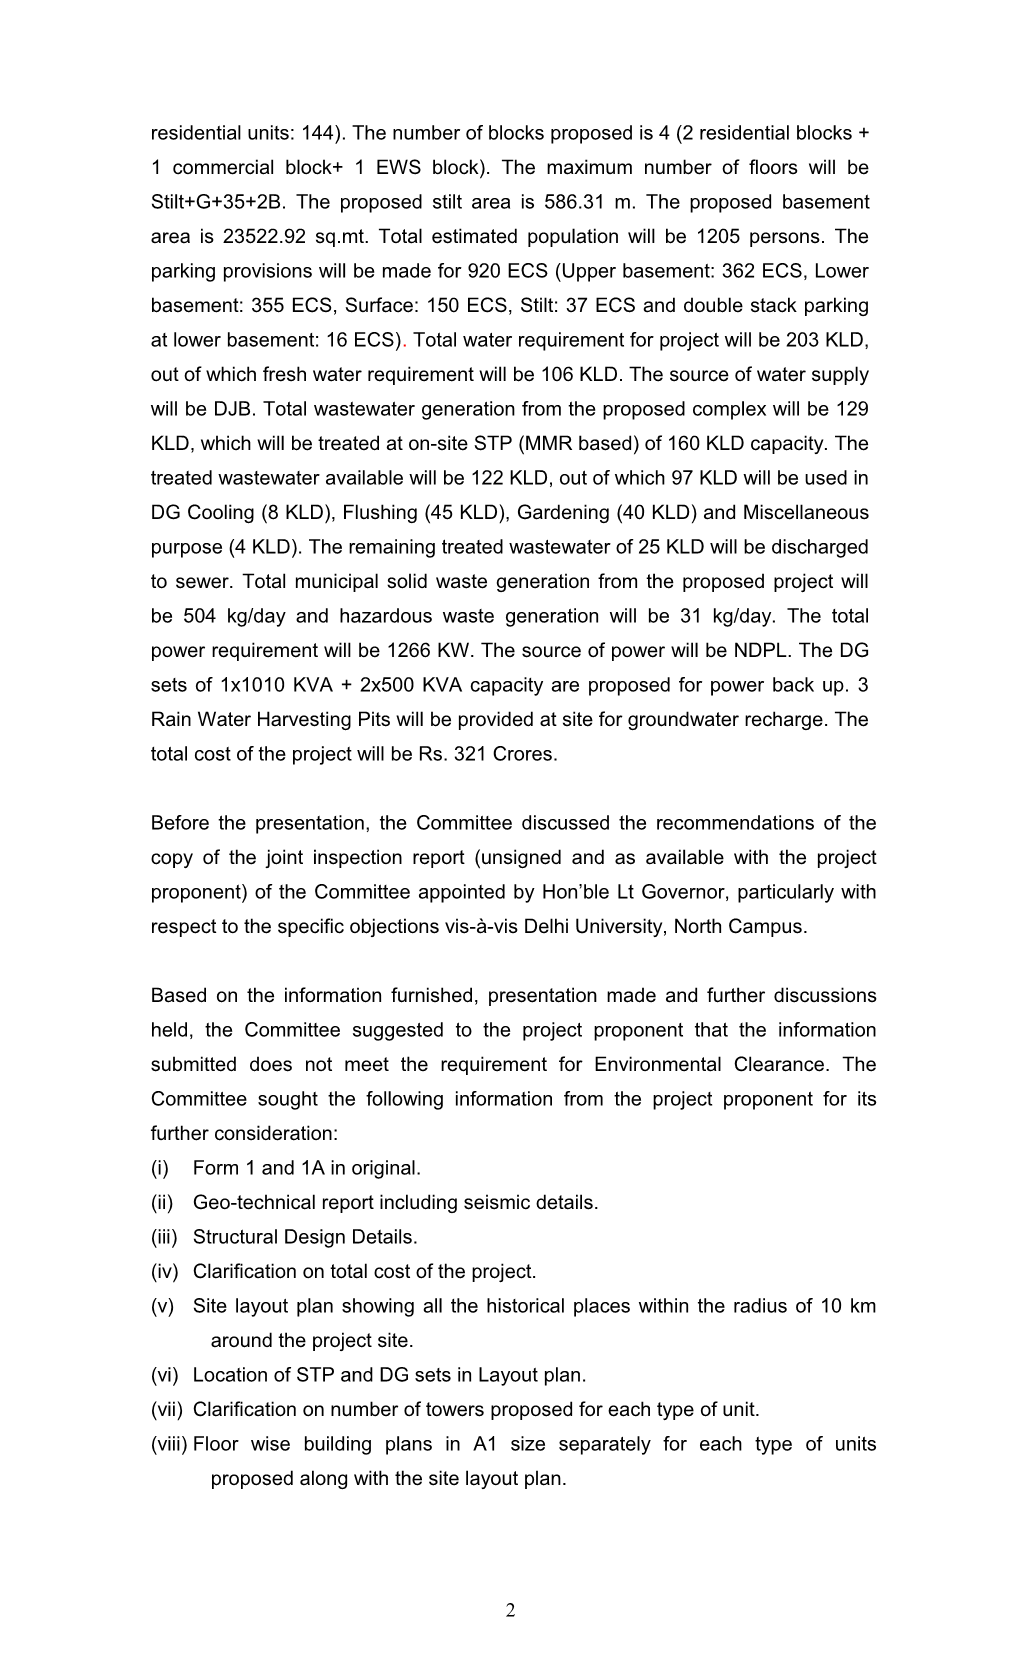 Minutes of the 32Nd Meeting of State Level Expert Appraisal Committee (SEAC) Held on 30.06.2011